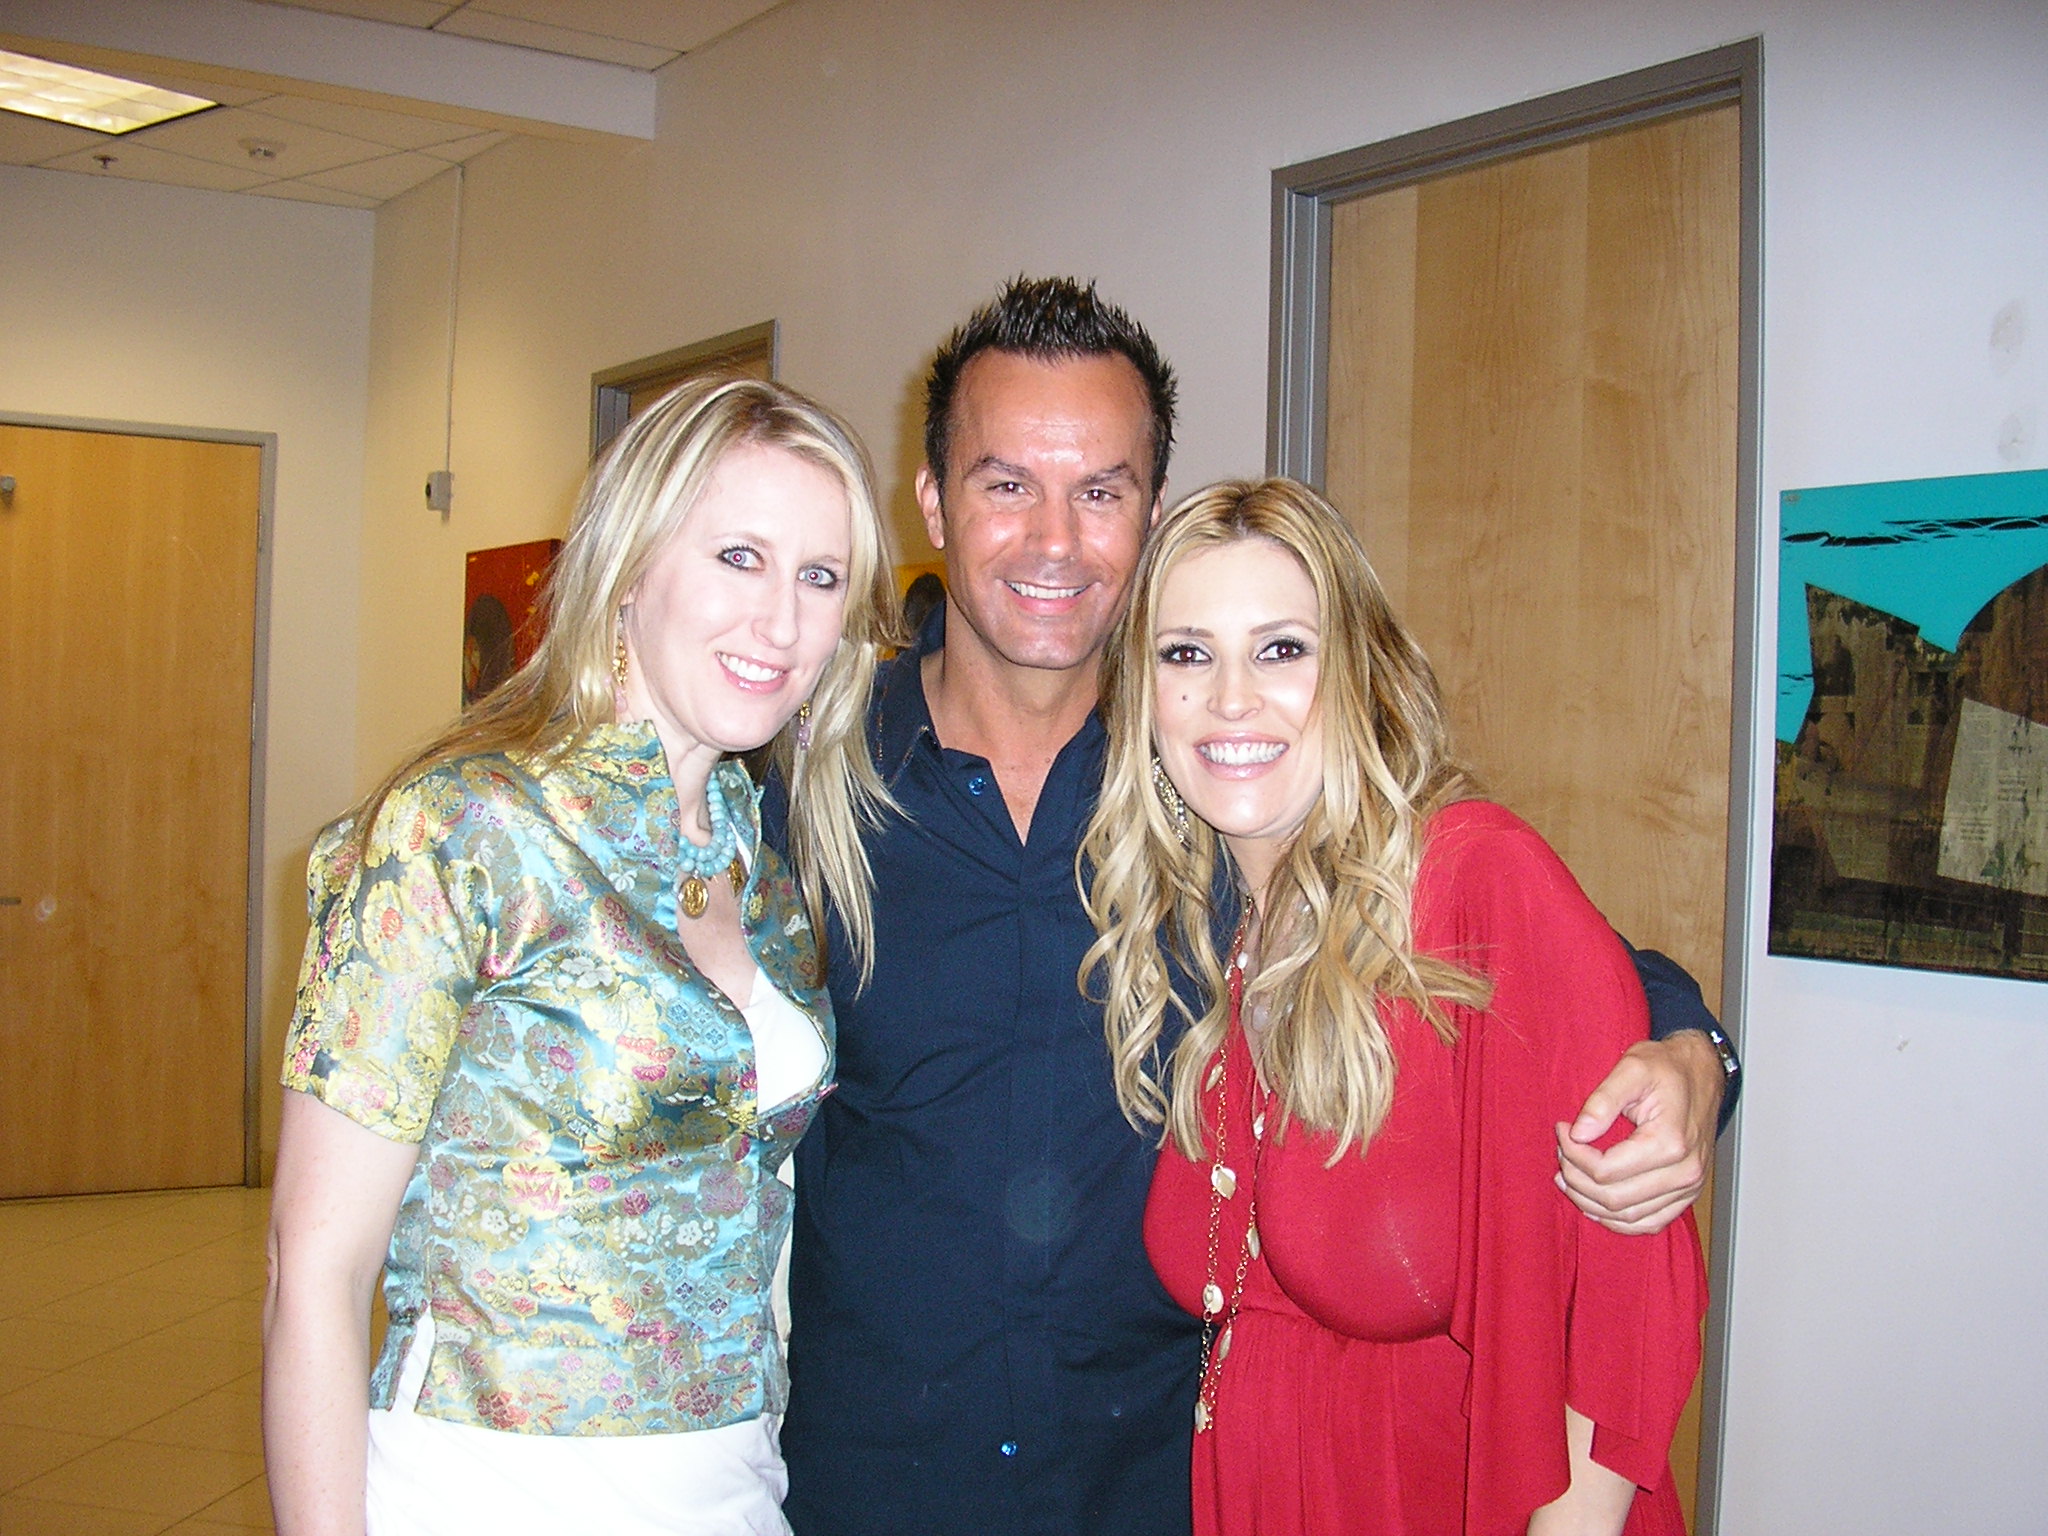 Mark Lund with Jillian Barberie and Liz Roman at the premiere of First World in Los Angeles.